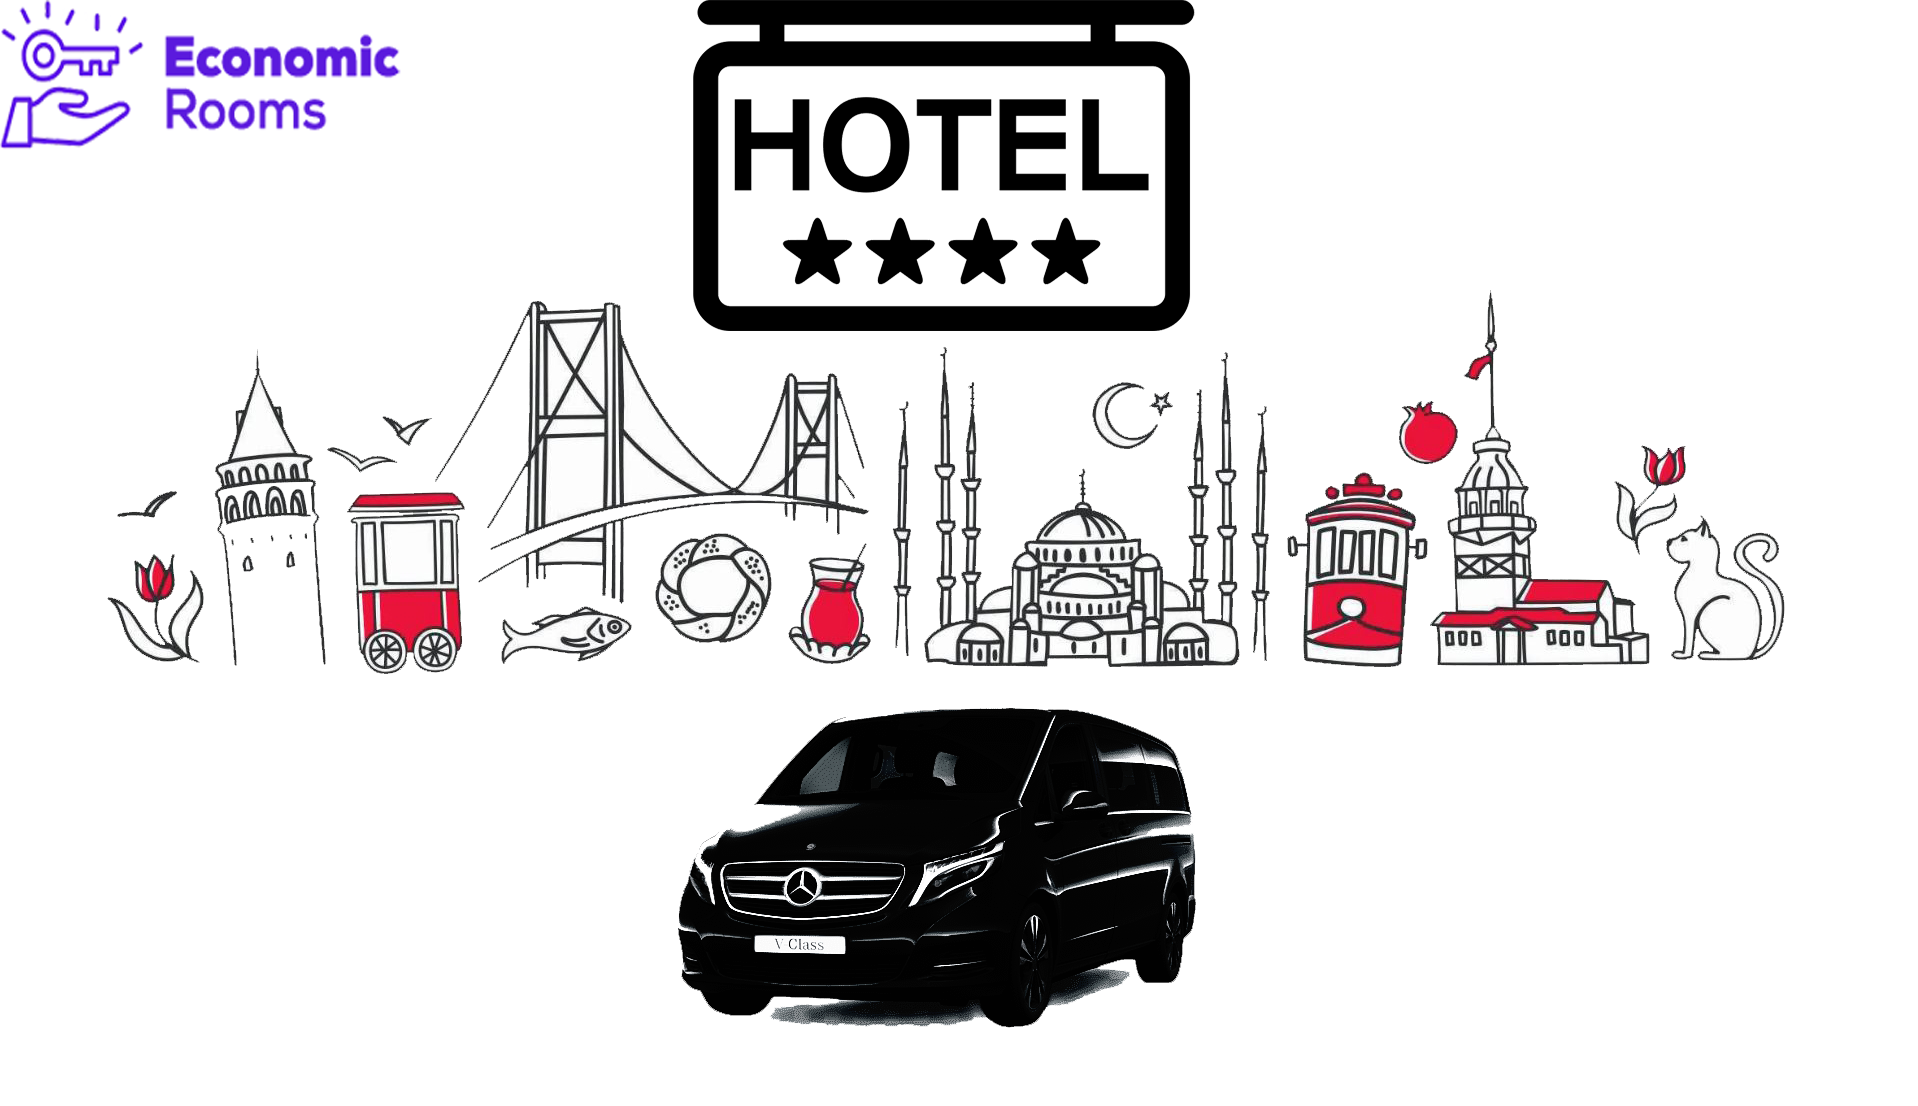 Discover the Heart of Istanbul: 4-Star Luxury, Seamless Transfers, and Historic Old City Tour!